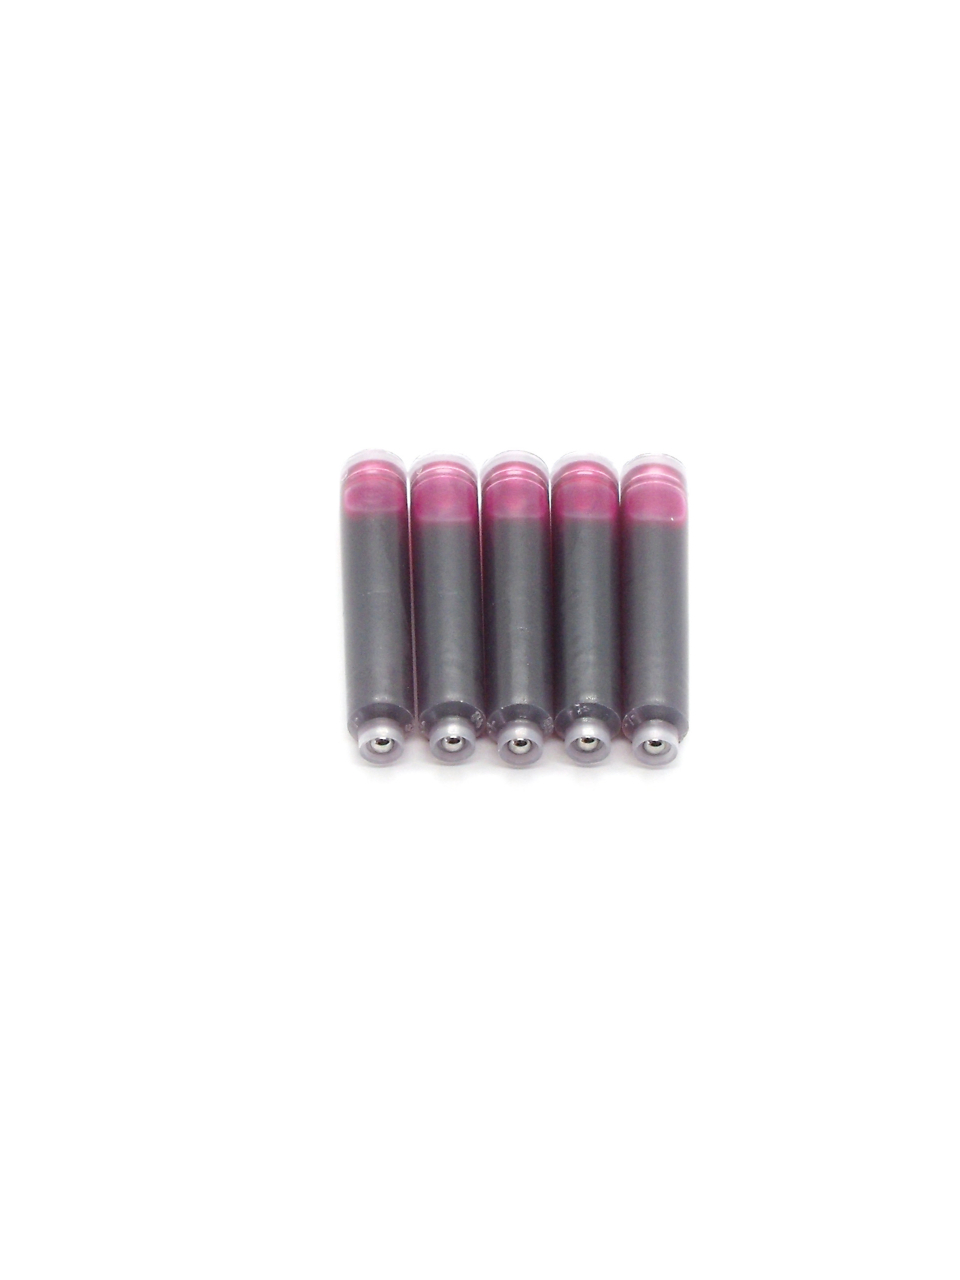 Top Ink Cartridges For Wenliang Fountain Pens (Pink)